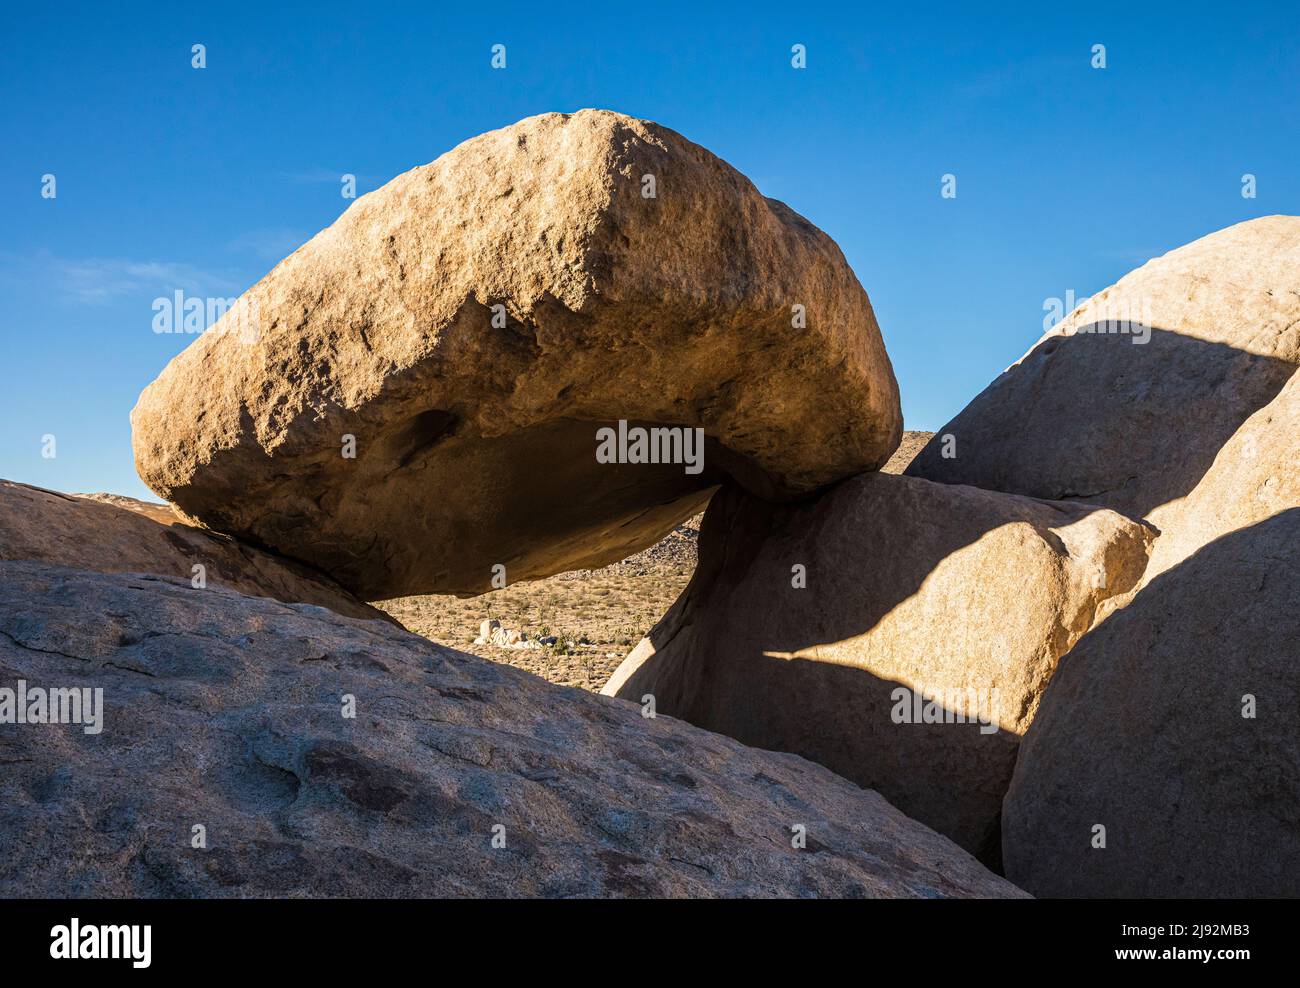 Boulders and an archway in the rock formations near the Ryan Mountain trailhead, Joshua Tree National Park. Stock Photo